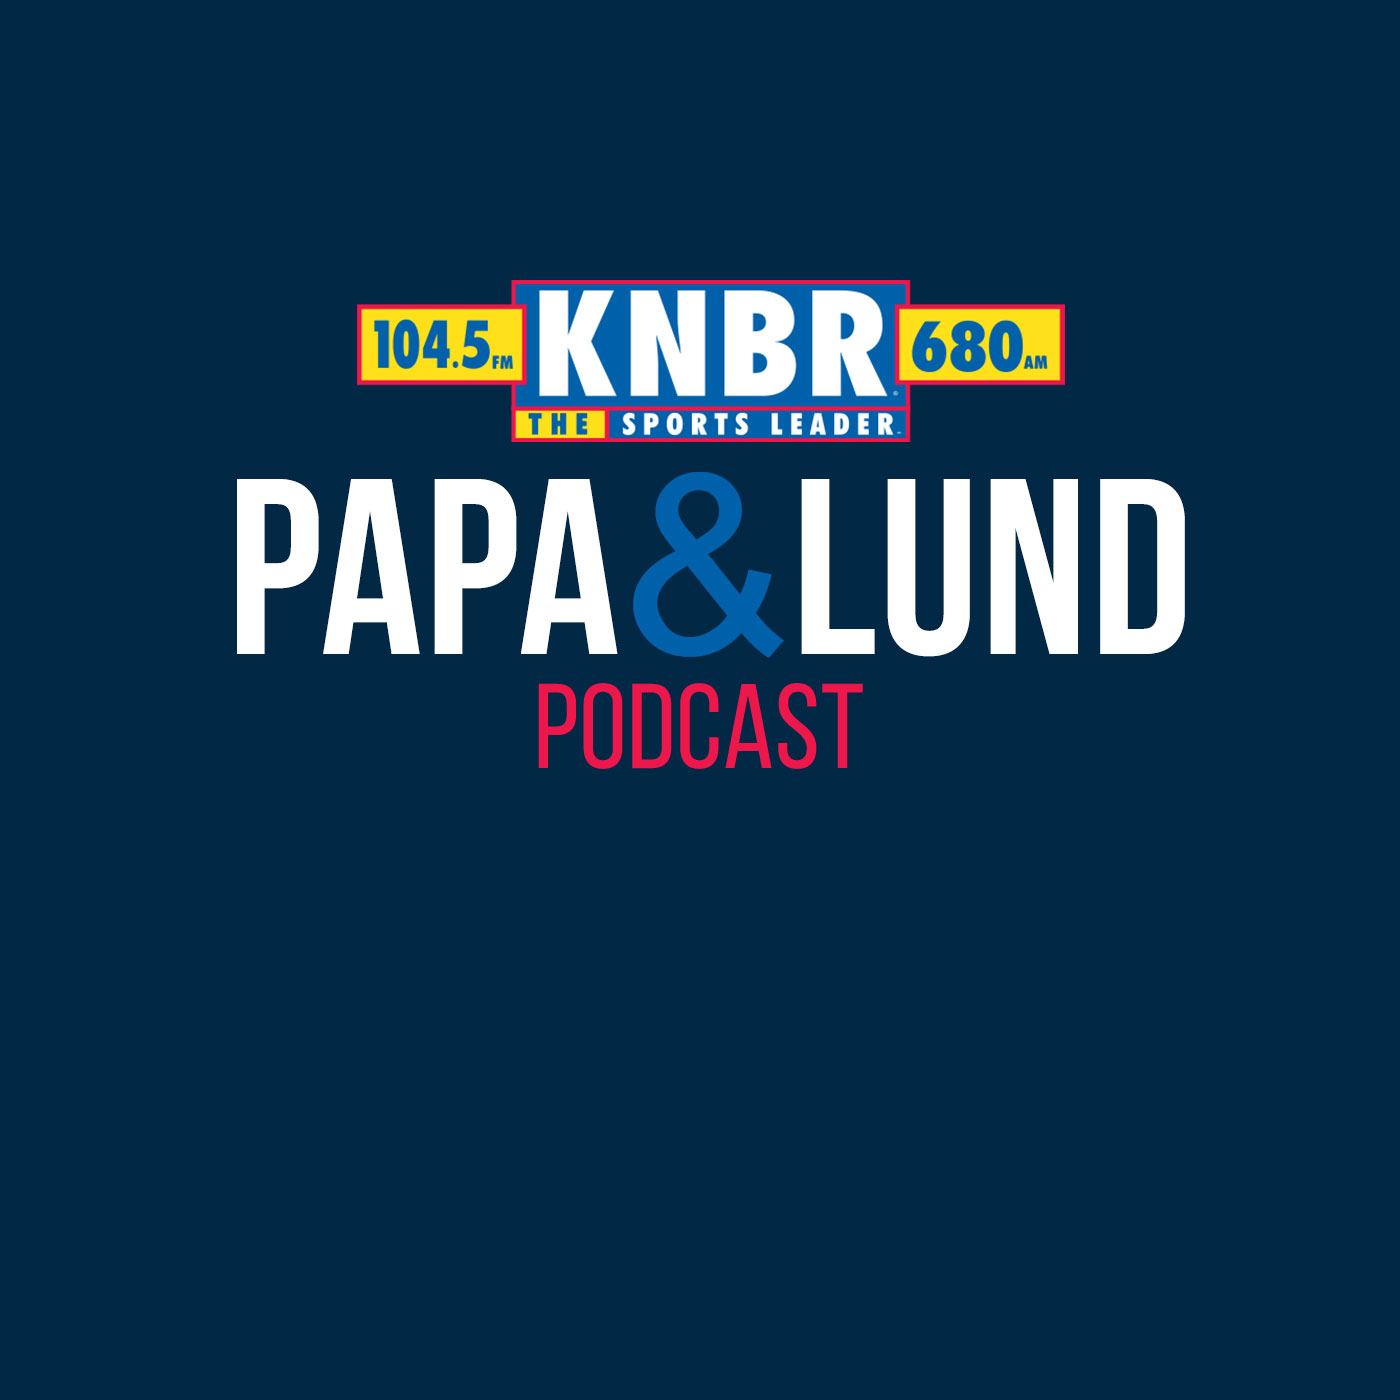 6-20 David Villar joins Papa & Lund to discuss being part of a wild win last night and details his journey back to the major leagues and discuss the mental health aspect of being a ballplayer